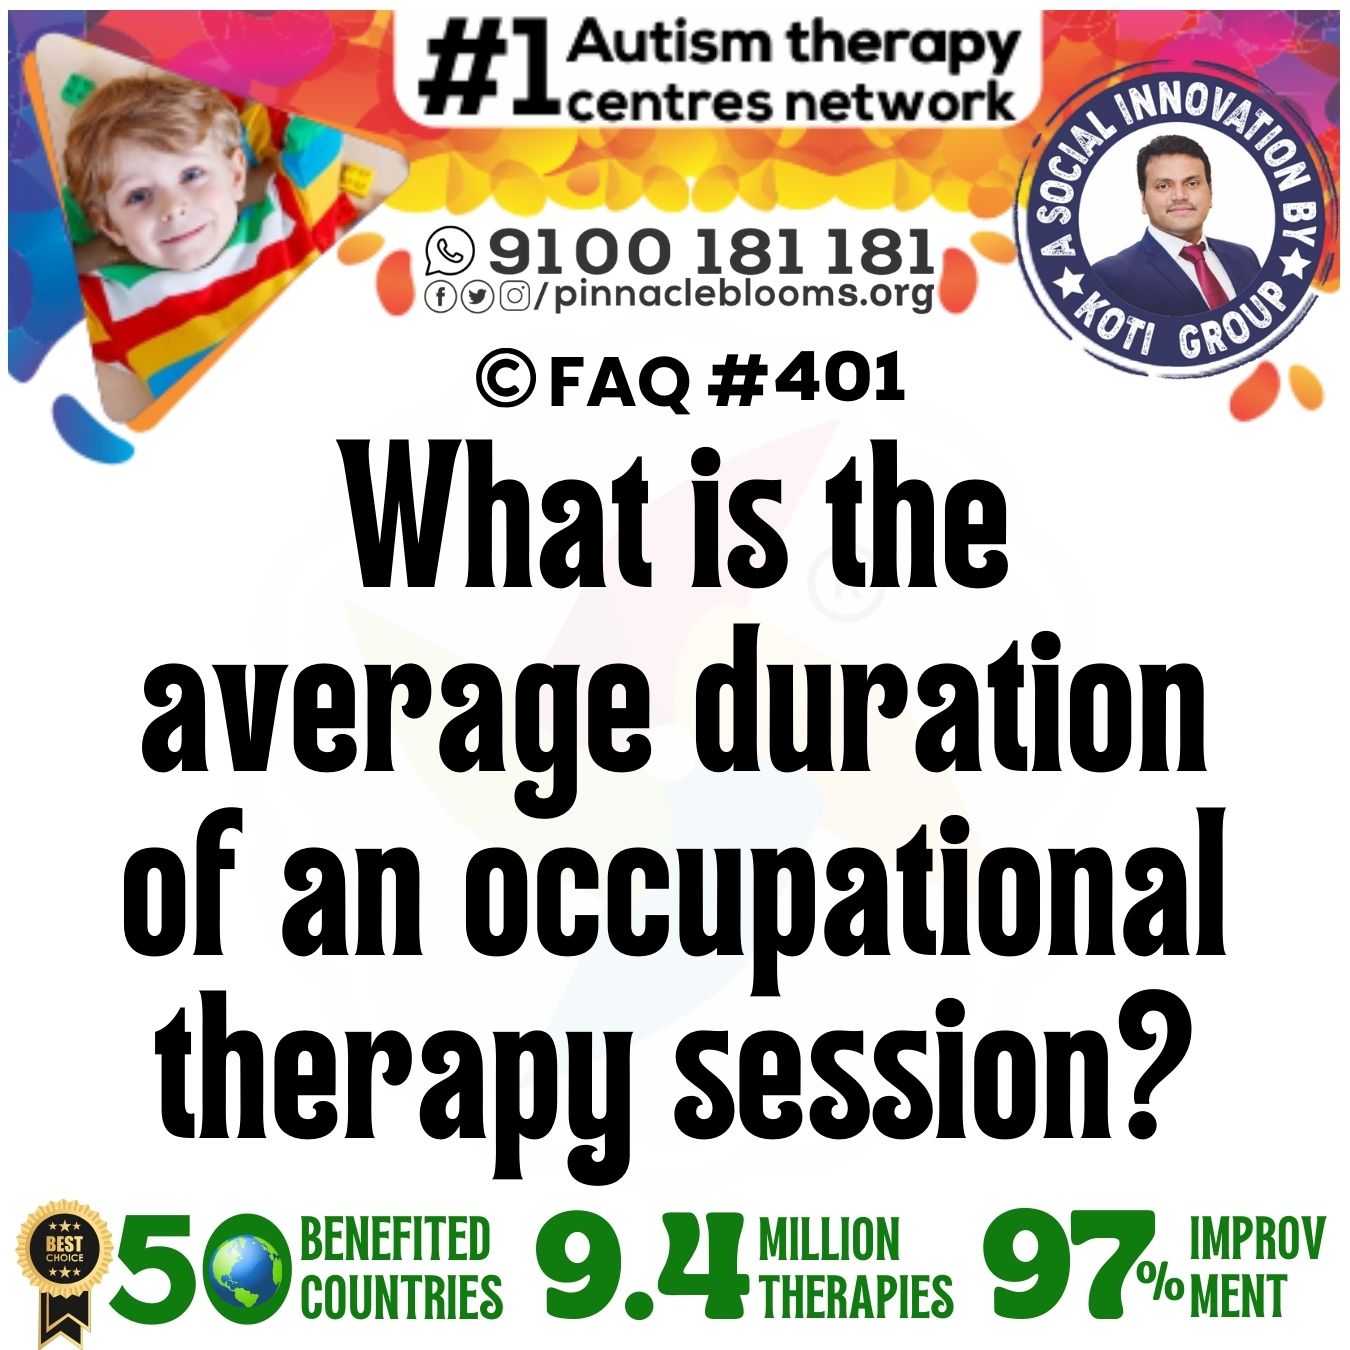 What is the average duration of an occupational therapy session?